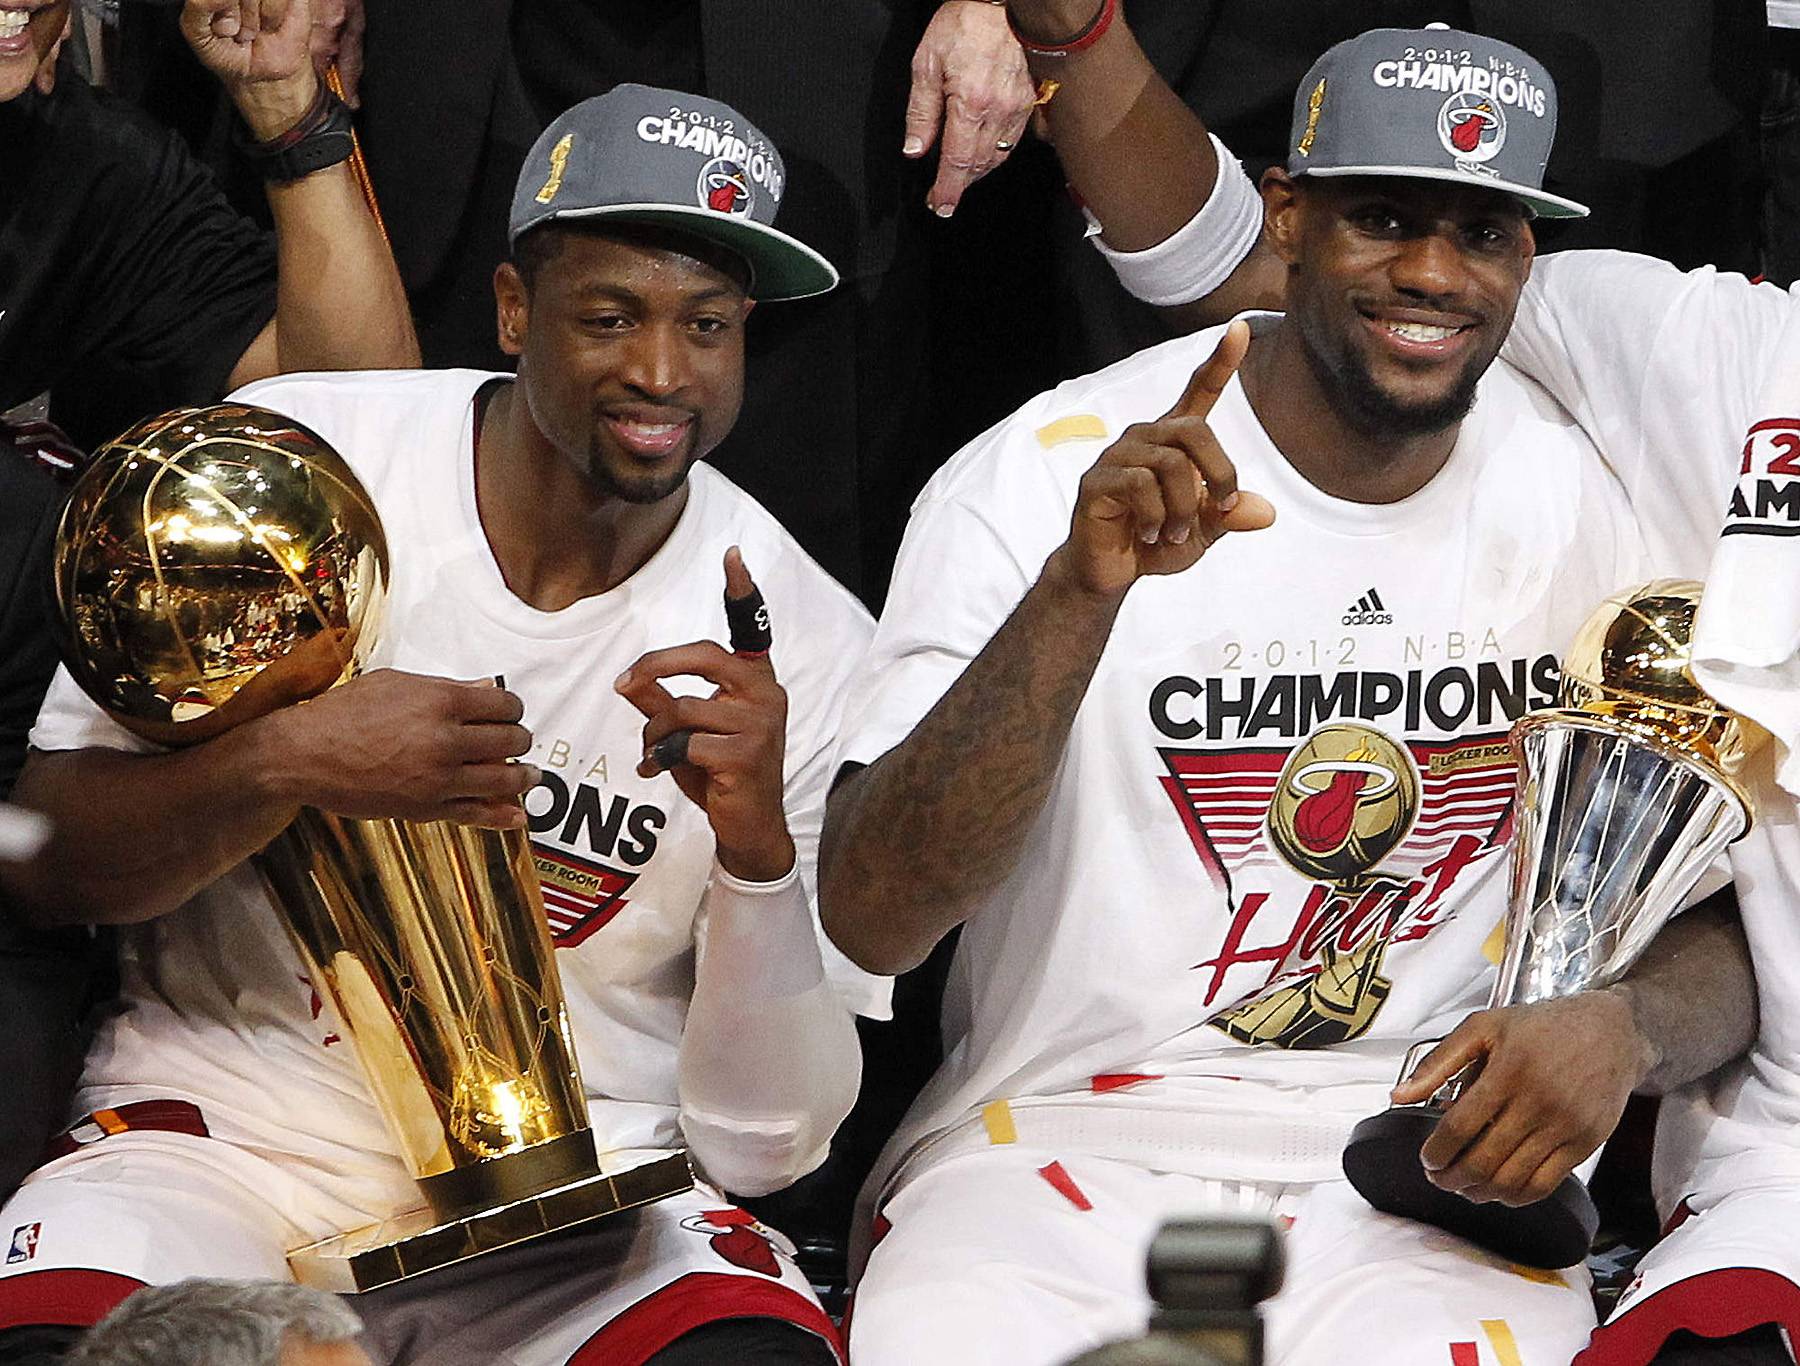 Just the Two of Us - The Heat's Wade cradles the Larry O'Brien NBA Championship Trophy alongside James, who was named game MVP. (Photo: AP Photo/Lynne Sladky)